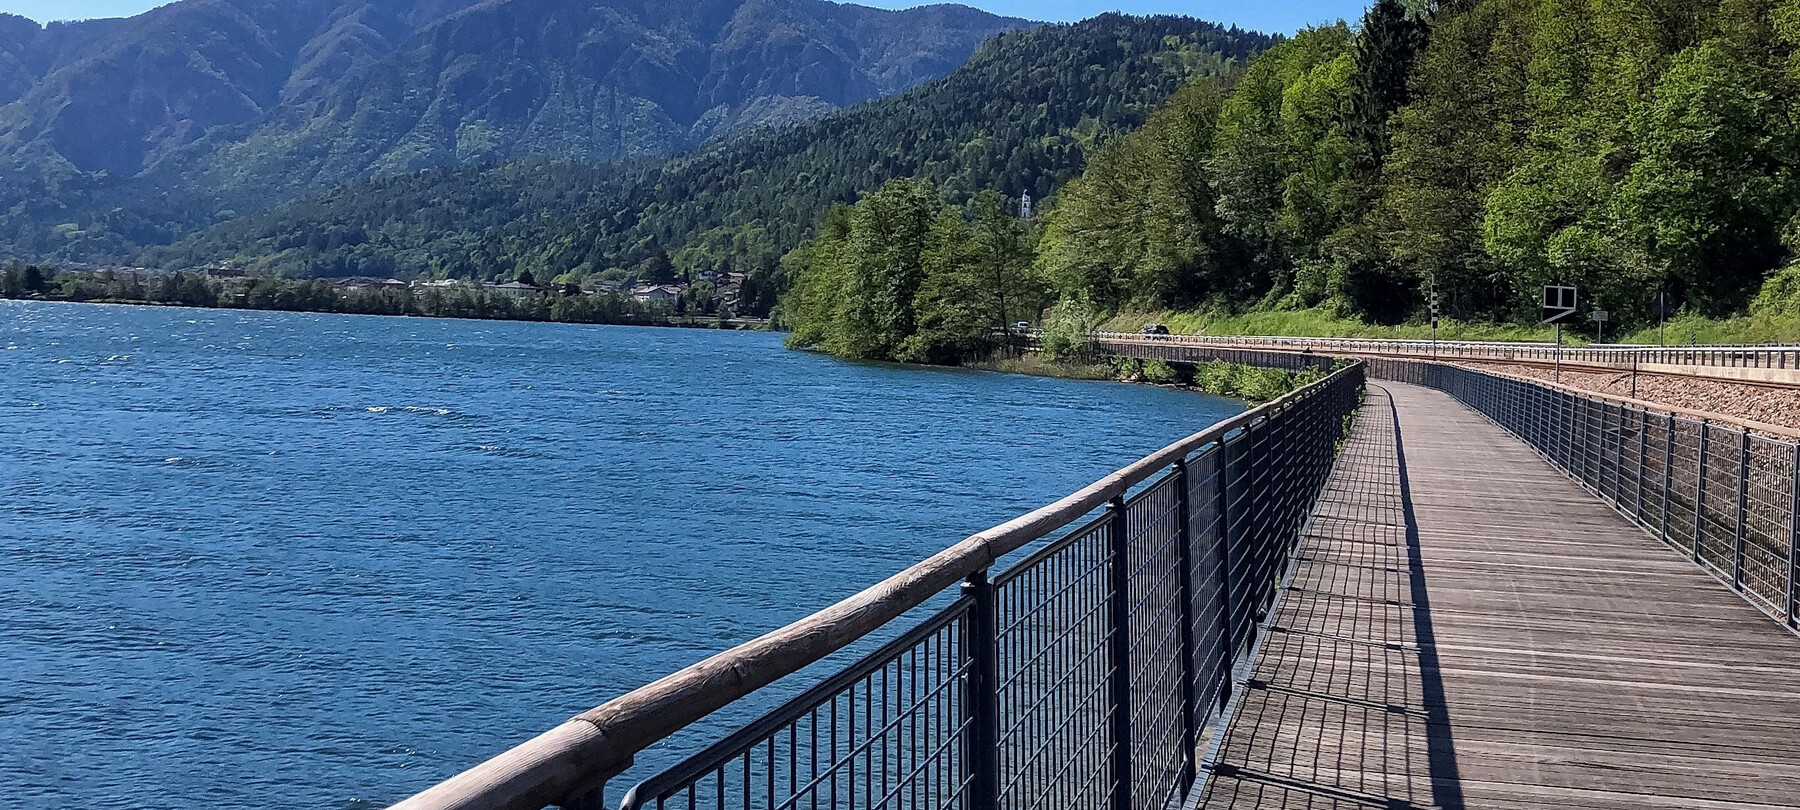 An easy route along the Valsugana cycleway